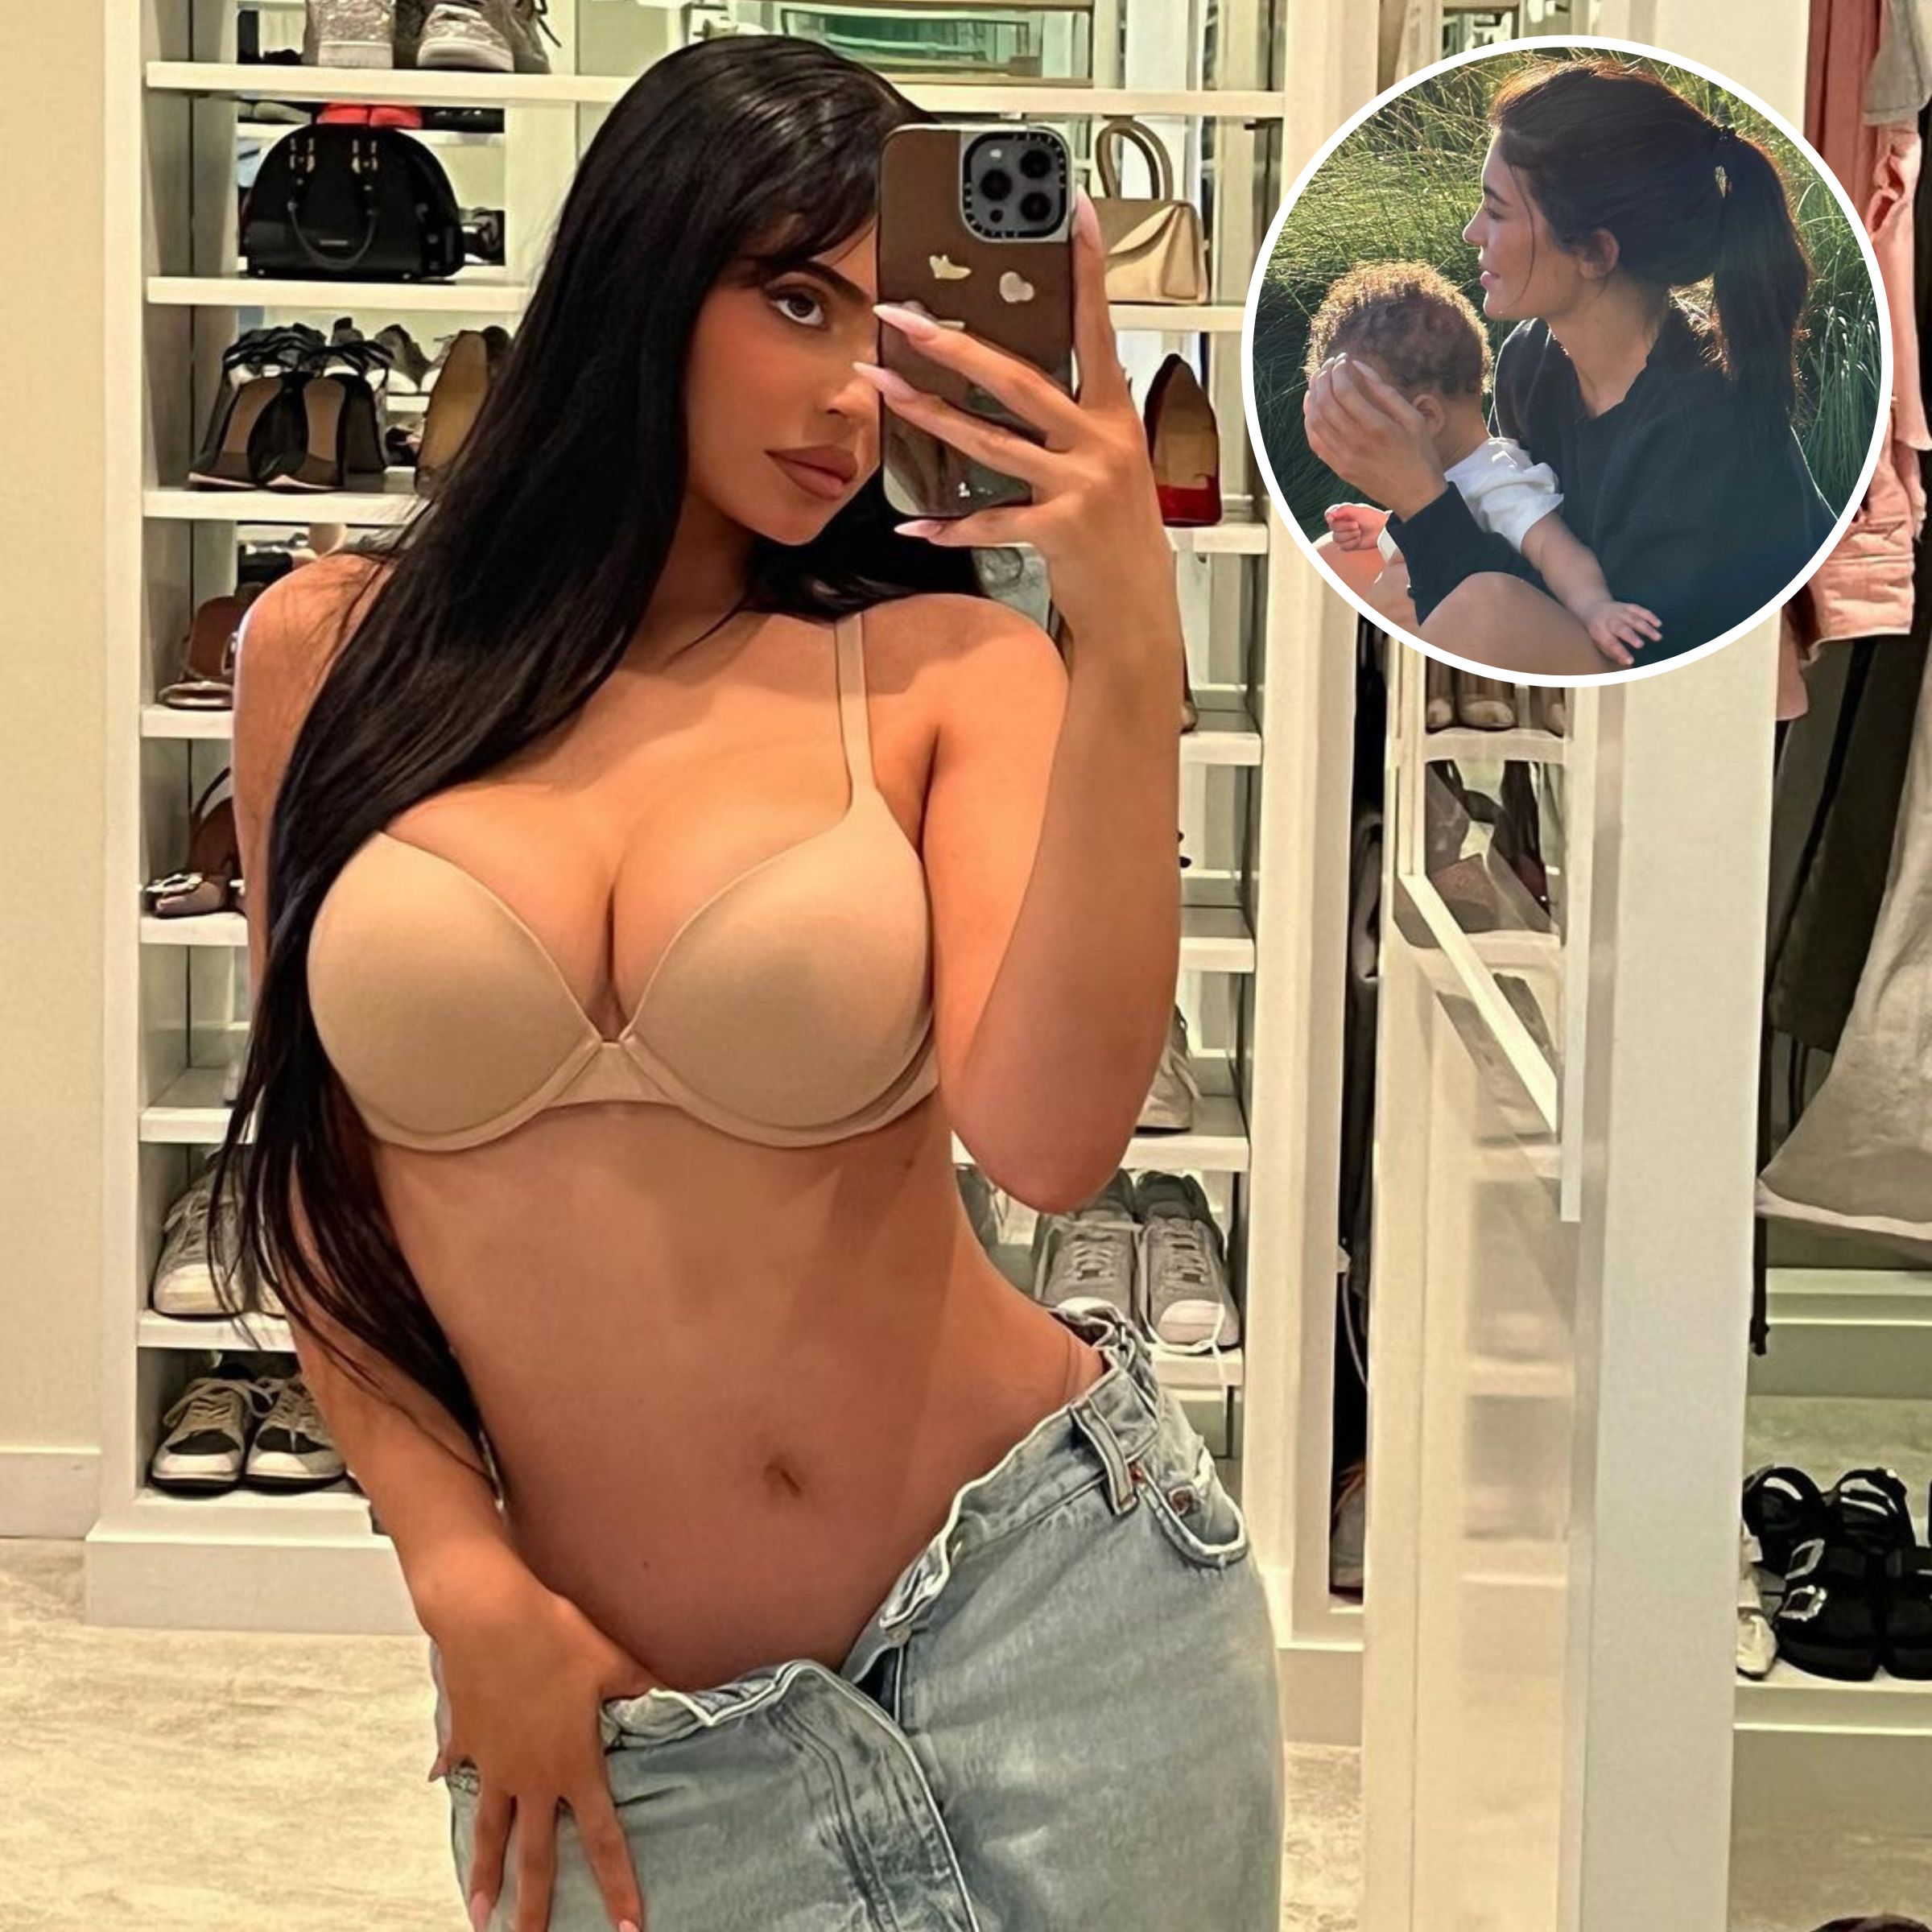 Topless Beach Tags - Kylie Jenner Slams Claims She 'Covered Up' Balenciaga Scandal